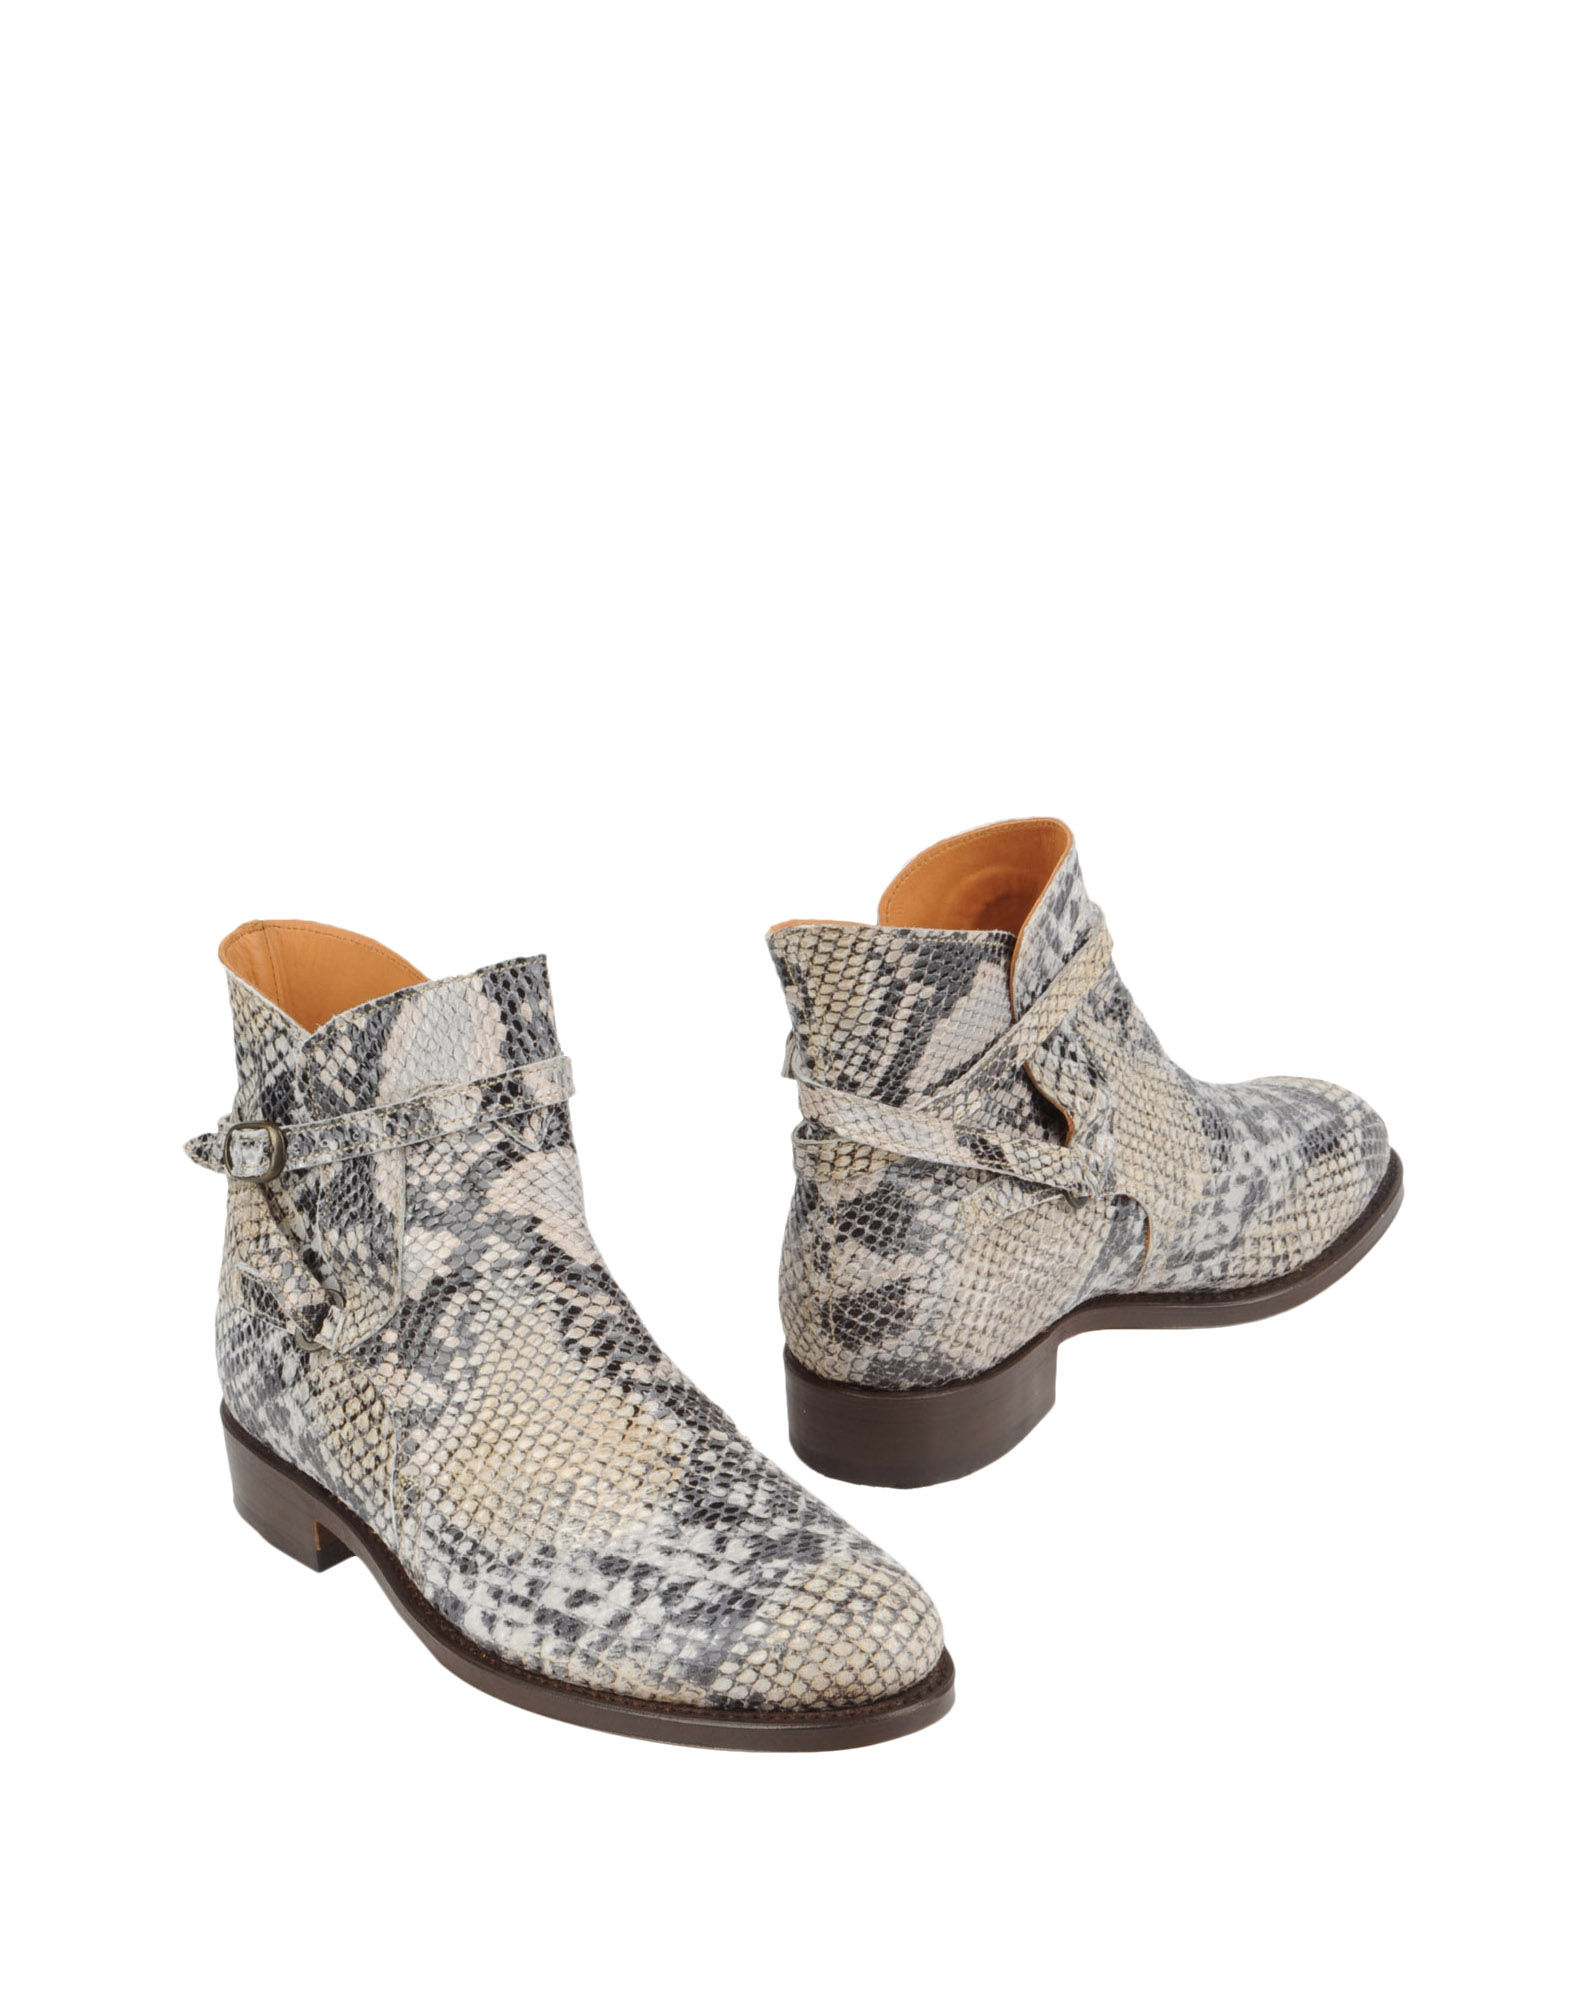 Penelope Chilvers Ankle Boots in Animal (ivory) | Lyst